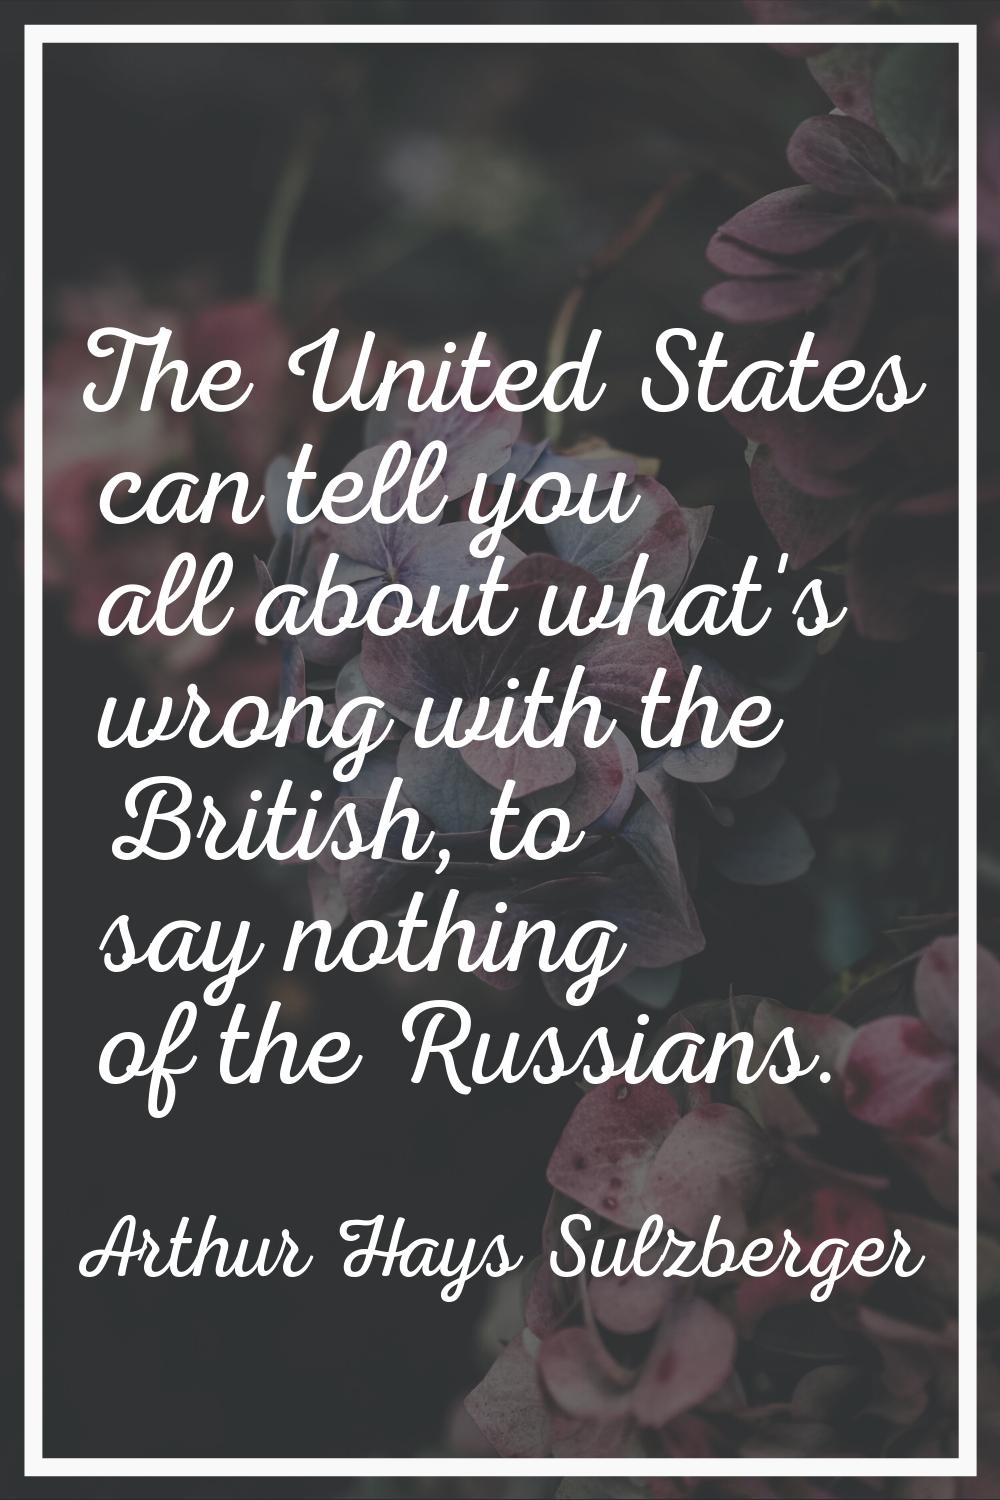 The United States can tell you all about what's wrong with the British, to say nothing of the Russi